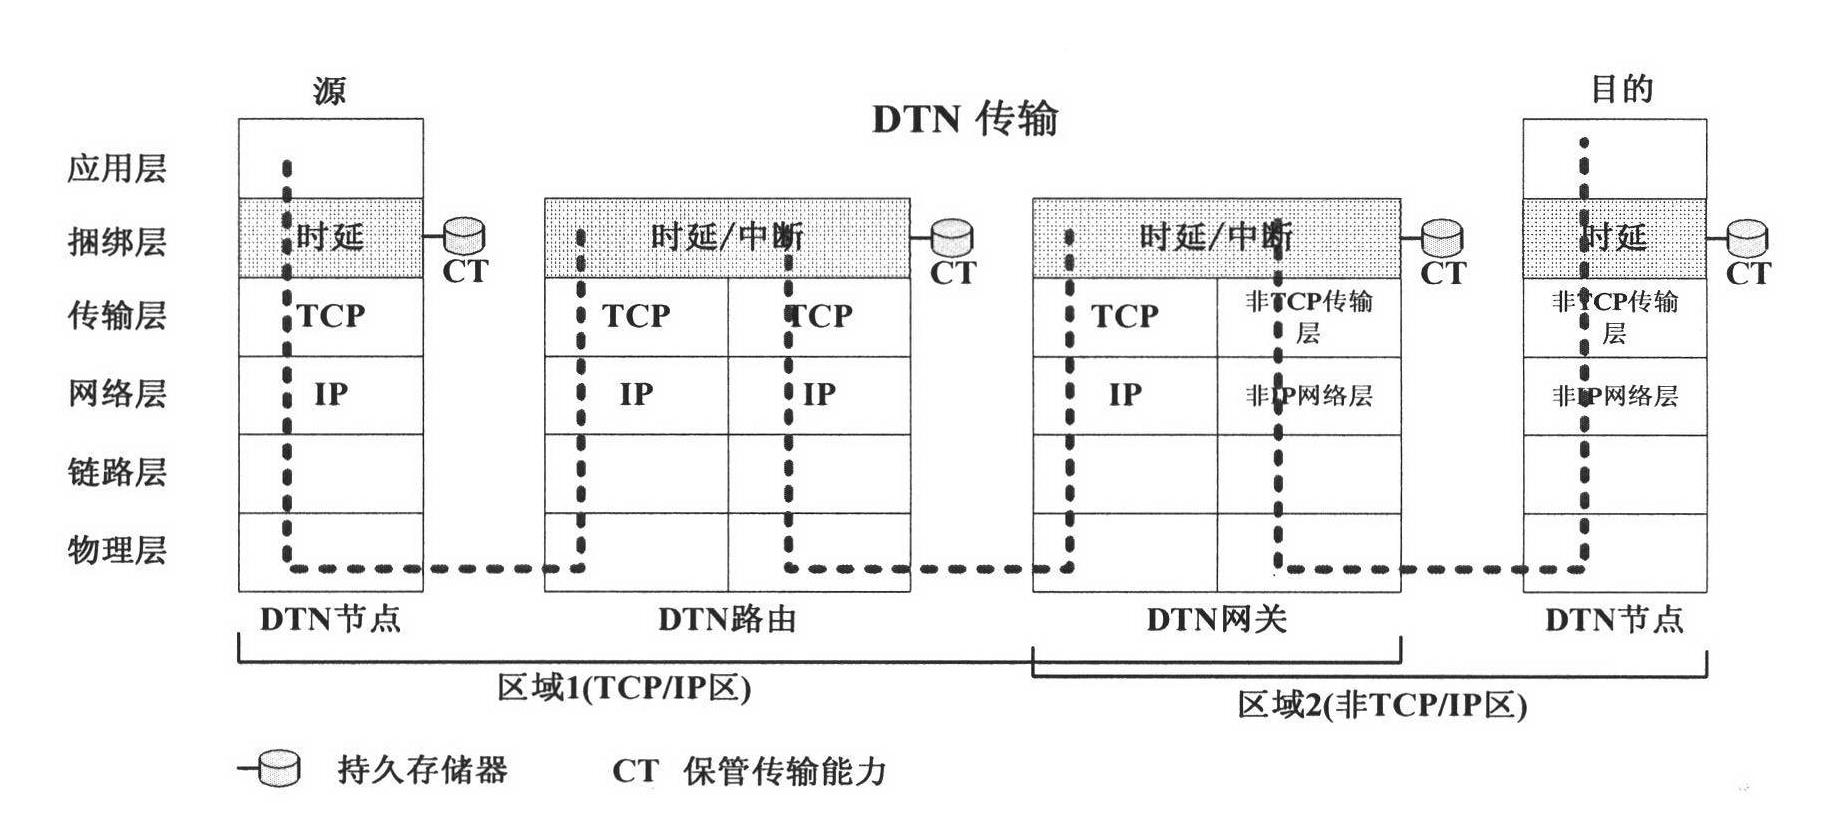 DTN asynchronous routing algorithm based on node position projection